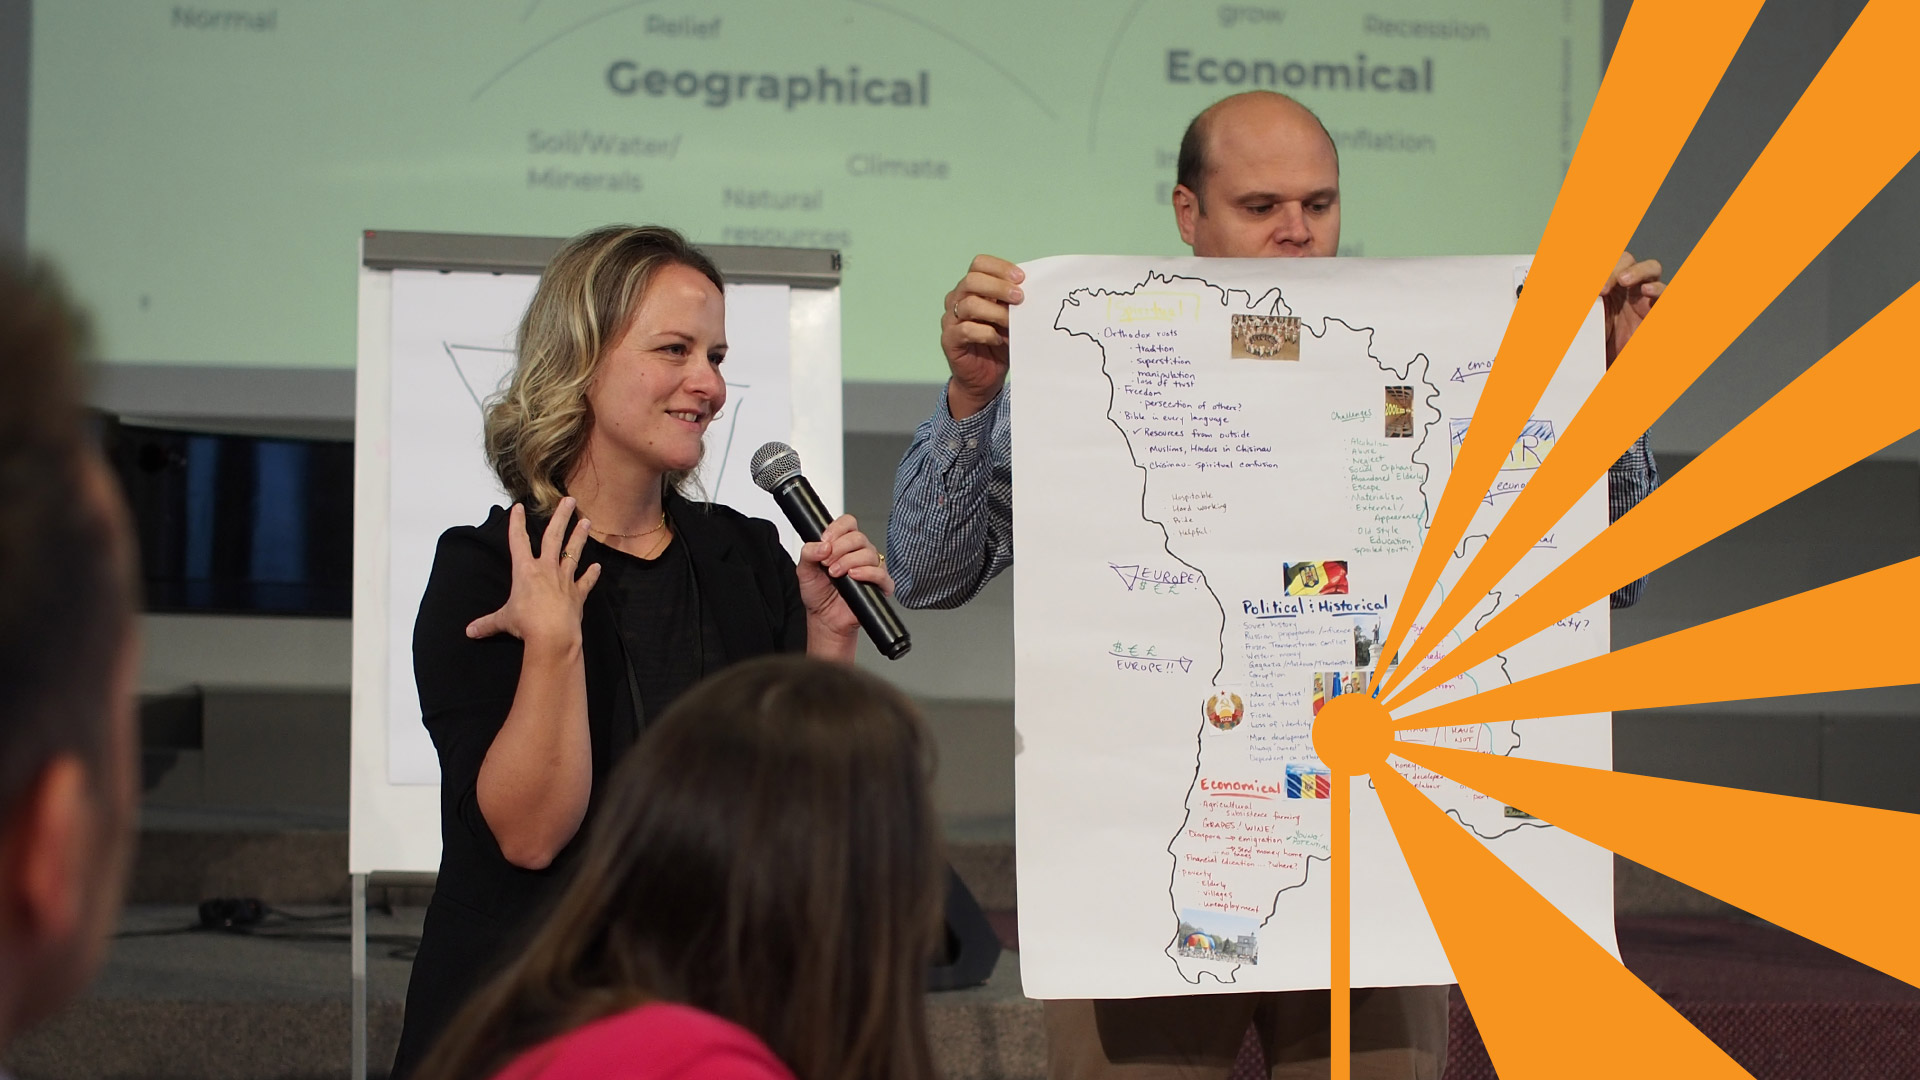 Woman presenting with microphone and man holding a hand-drawn map.